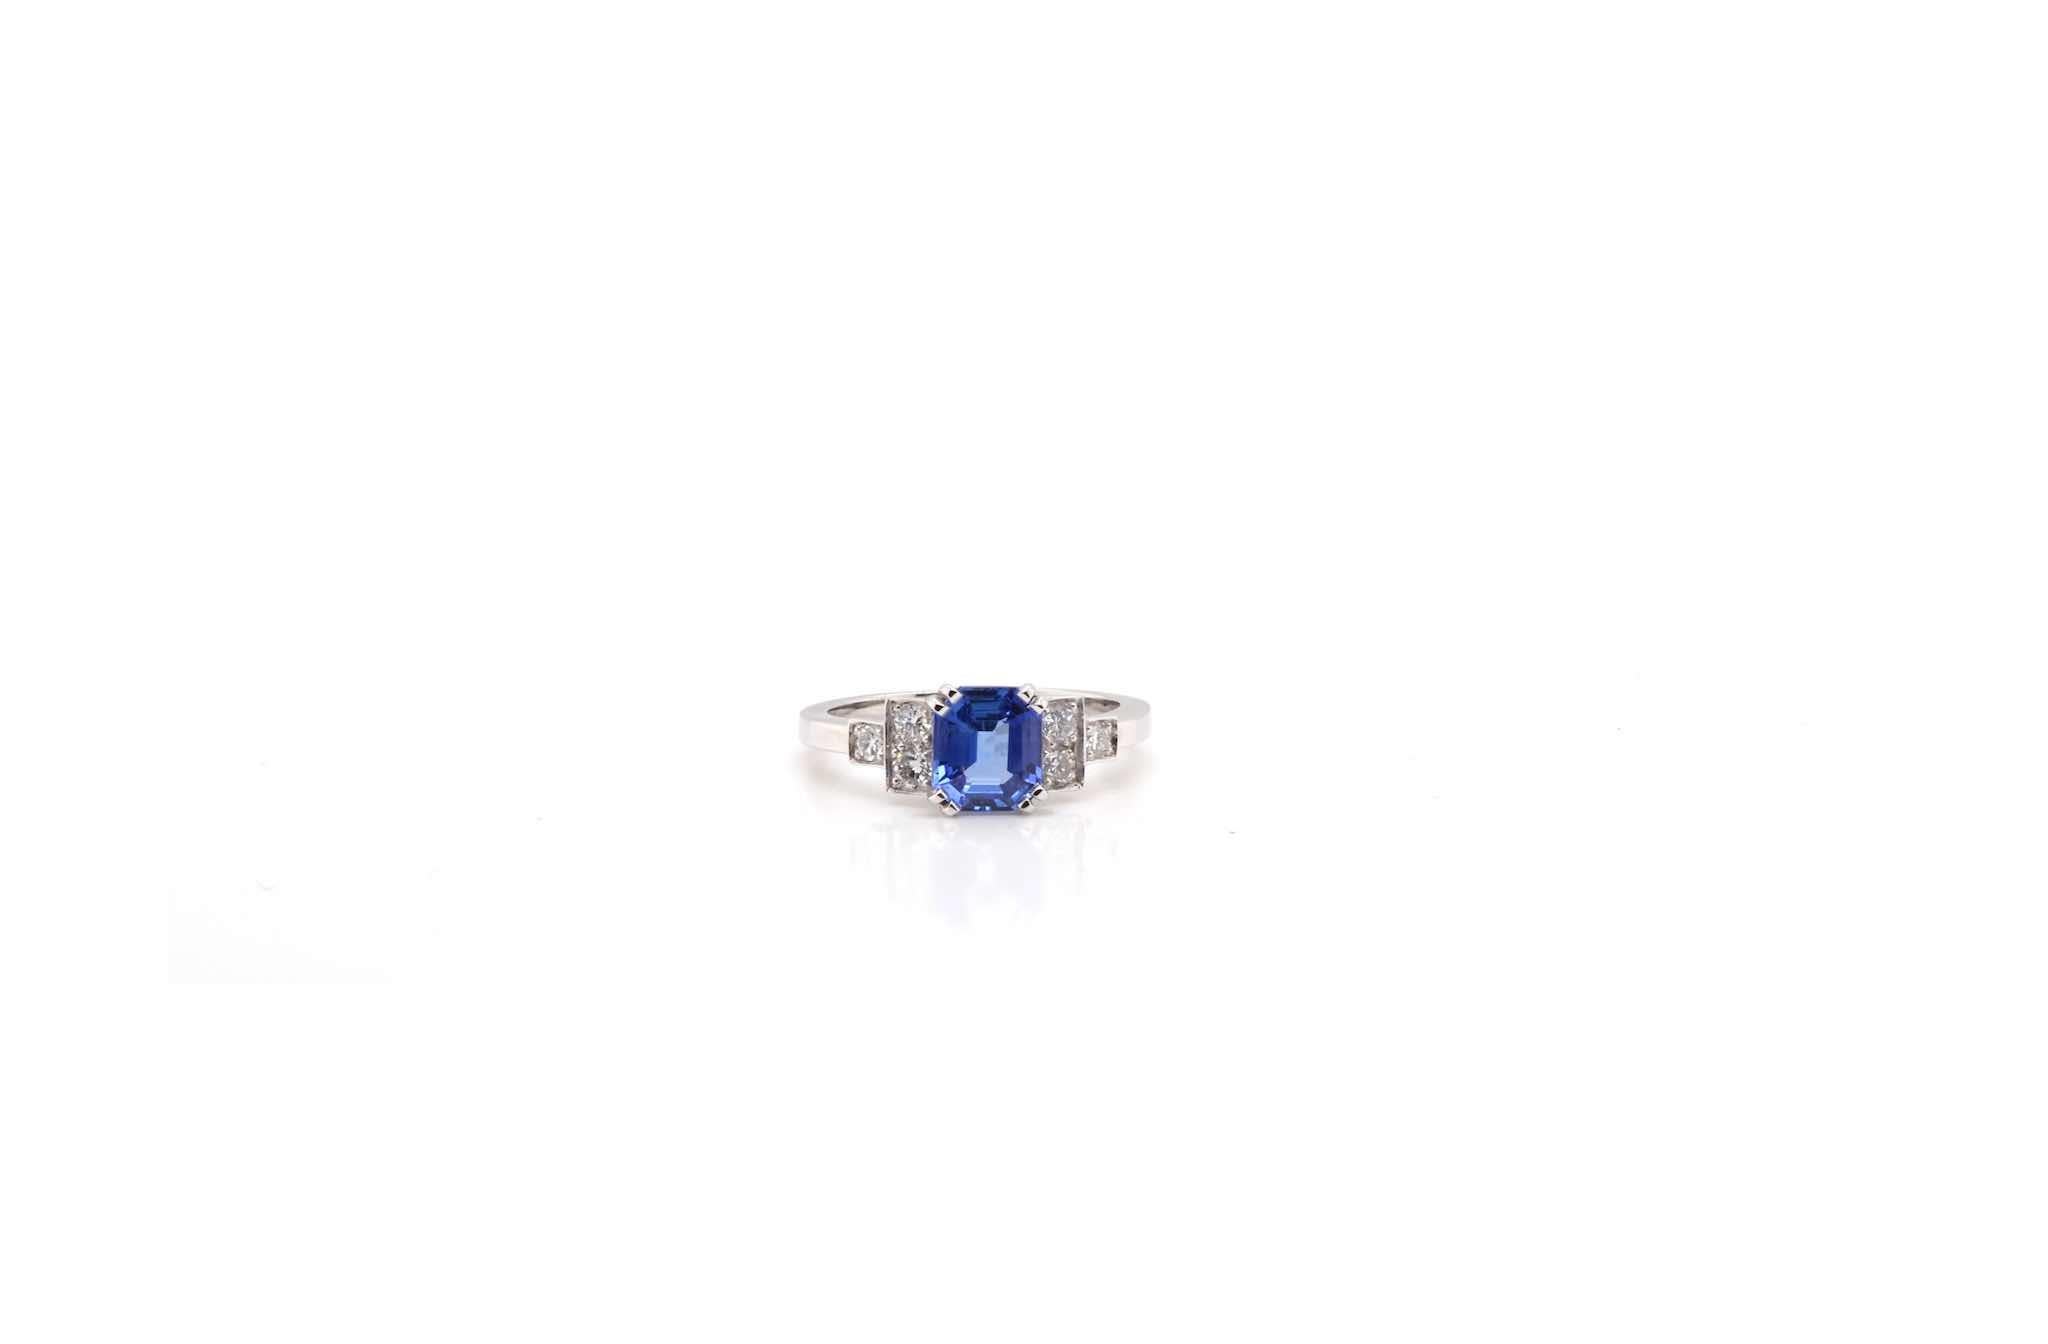 Stones: 1.69 carats Ceylon Sapphire
and diamonds for a total weight of 0.20 carat.
Material: Platinum
Dimensions: 7 mm length on finger
Weight: 4.8g
Size: 54 (free sizing)
Certificate
Ref. : 24012 / 24647